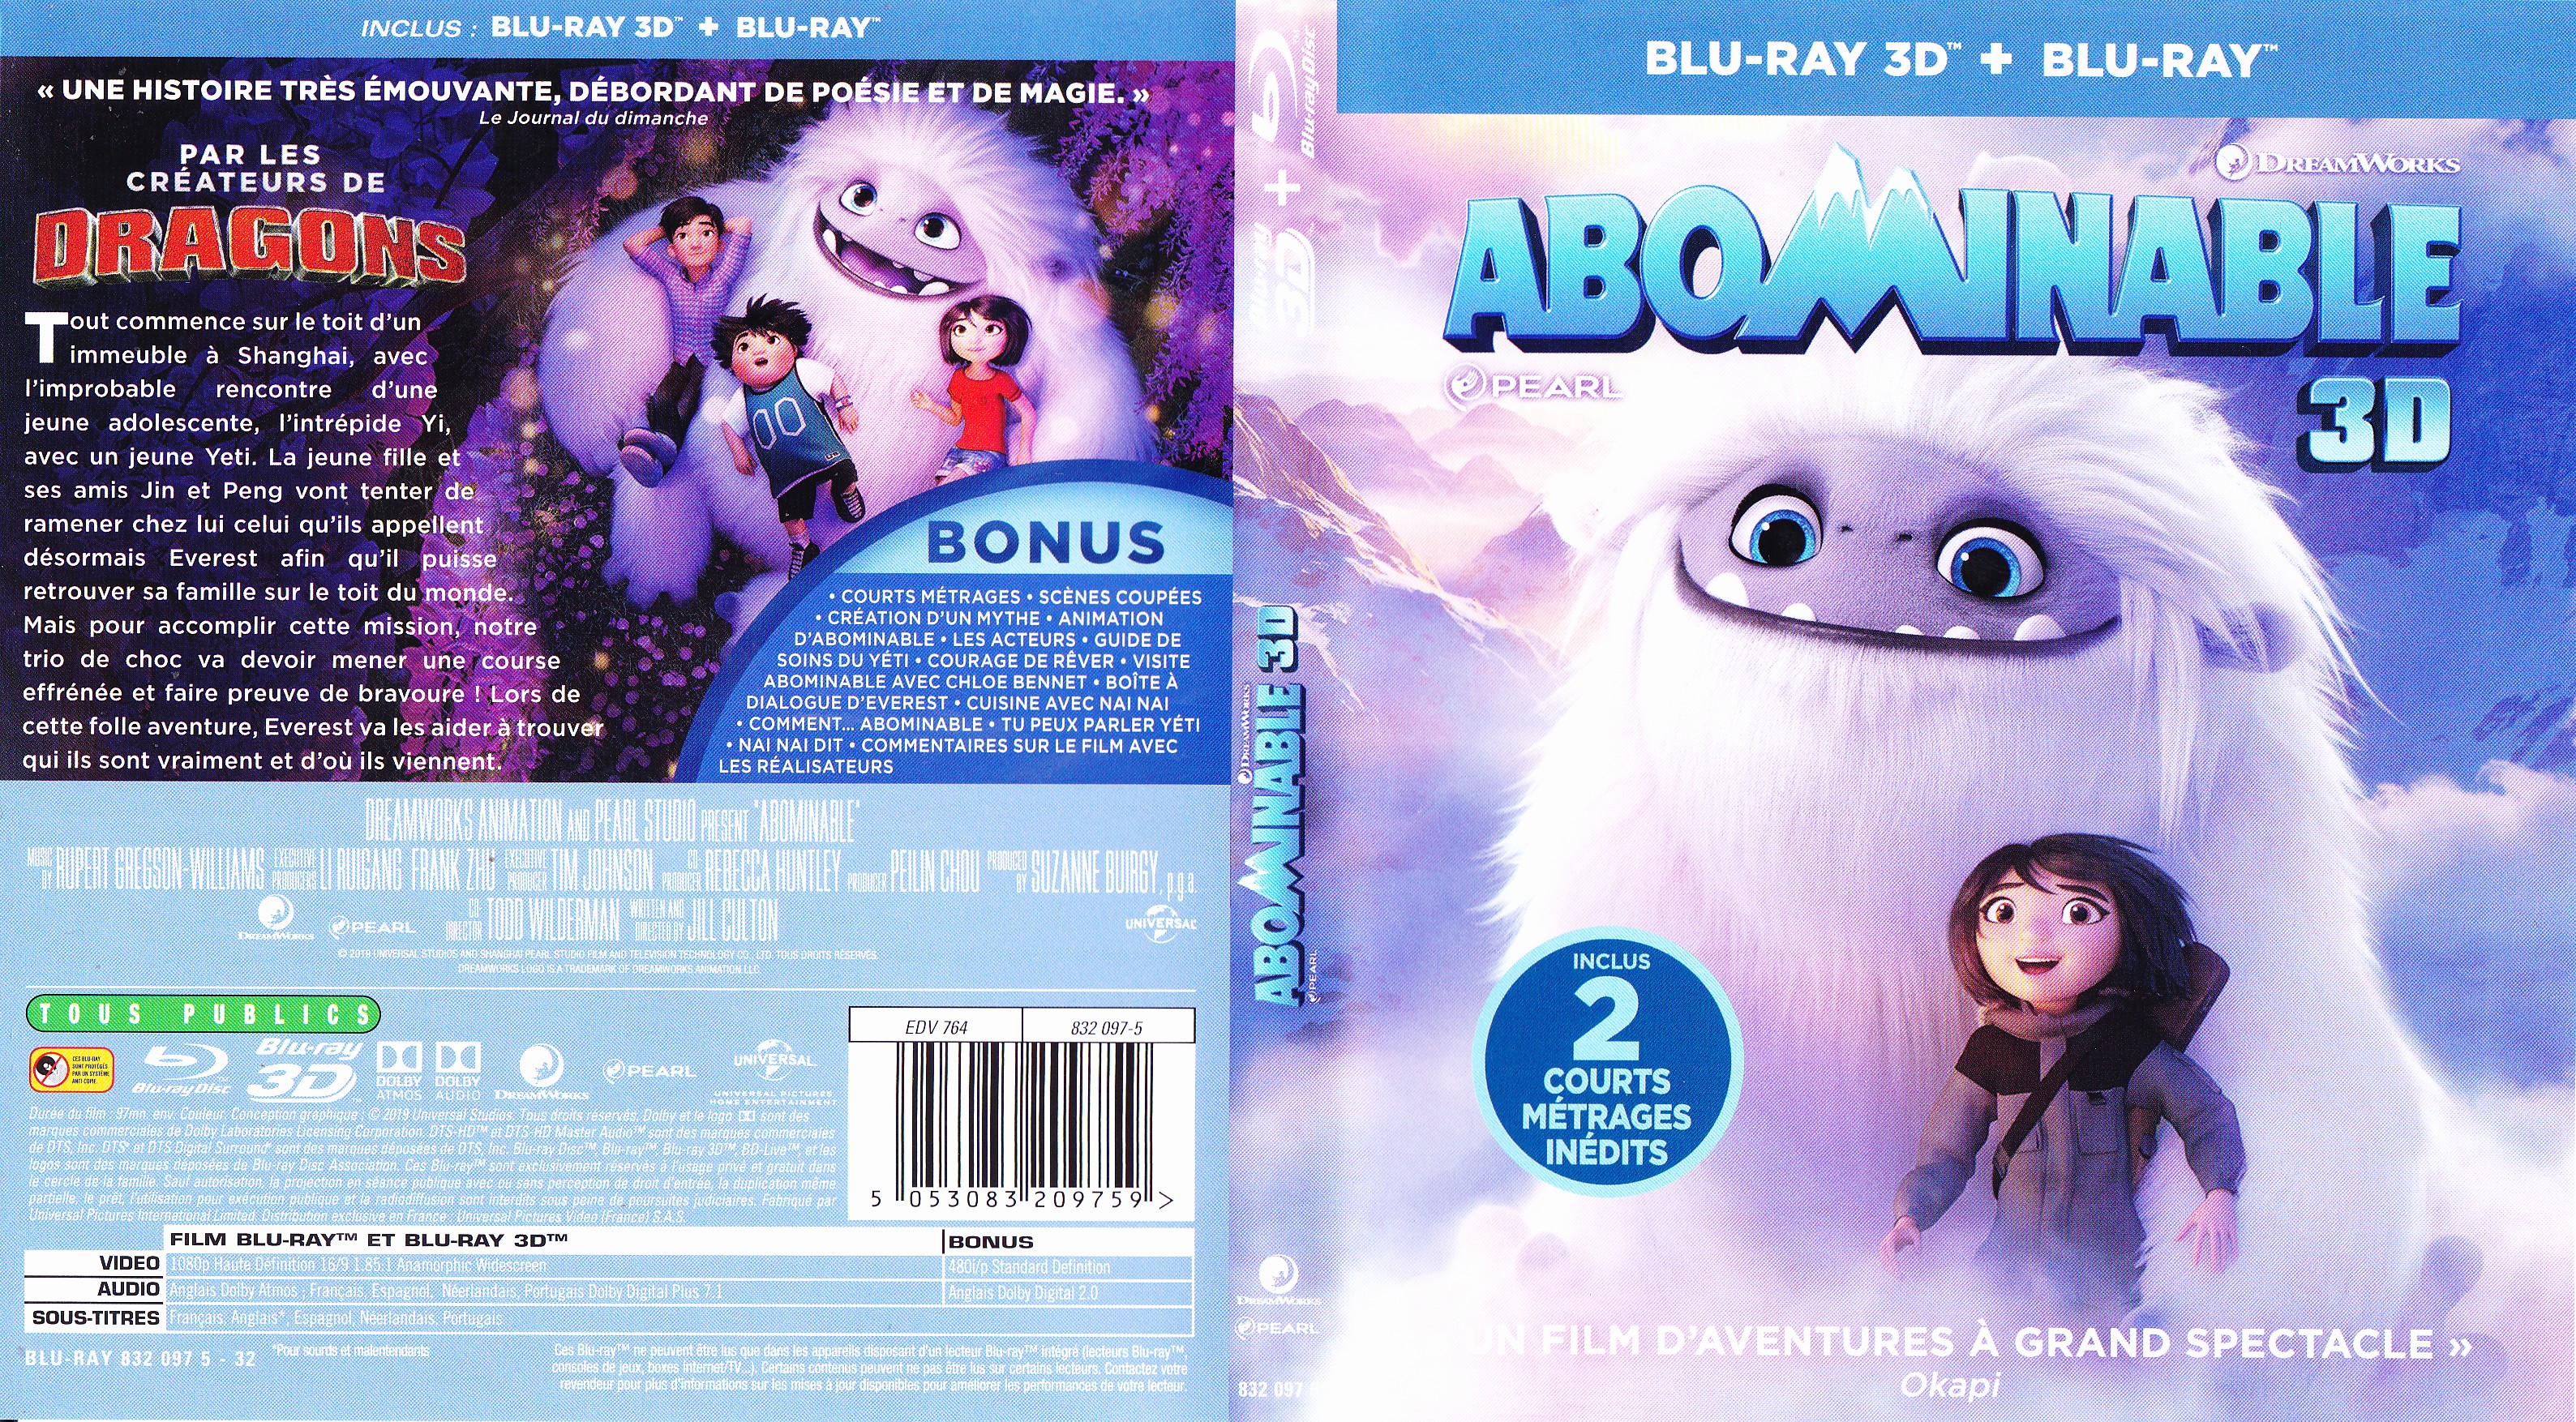 Jaquette DVD Abominable 3D (BLU-RAY)